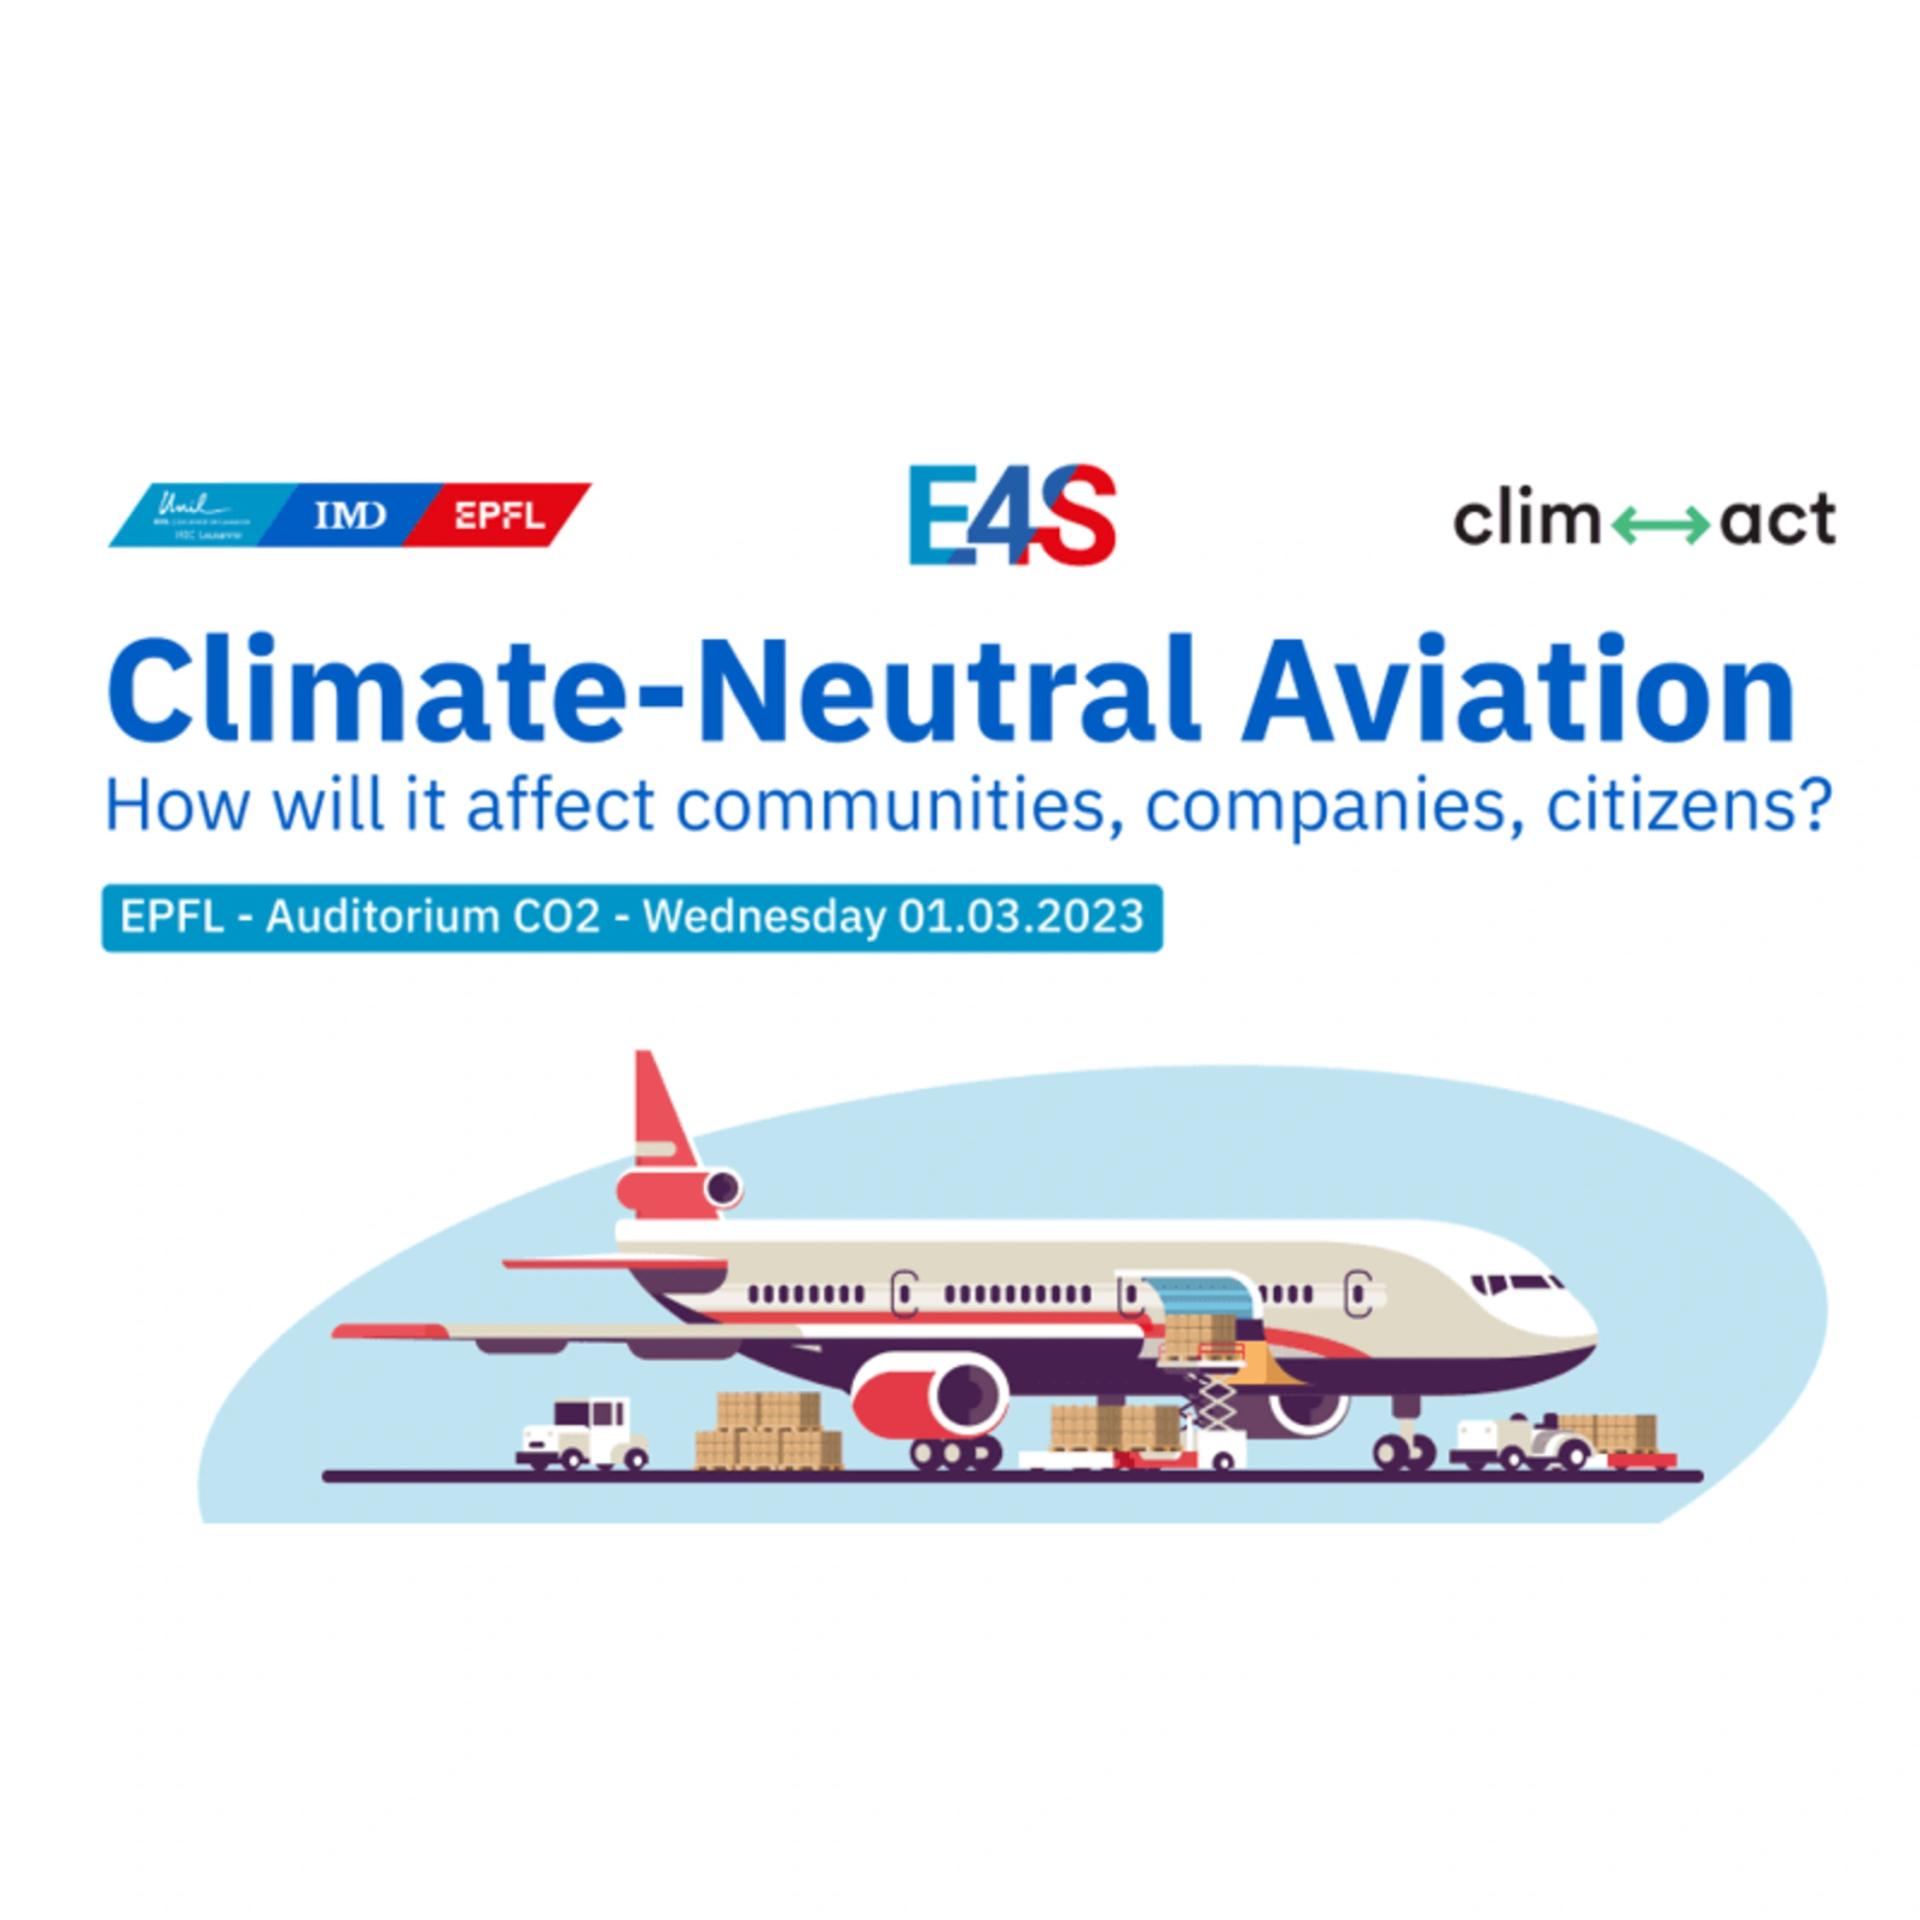 Climate-Neutral Aviation: how will it affect communities, companies, citizens?